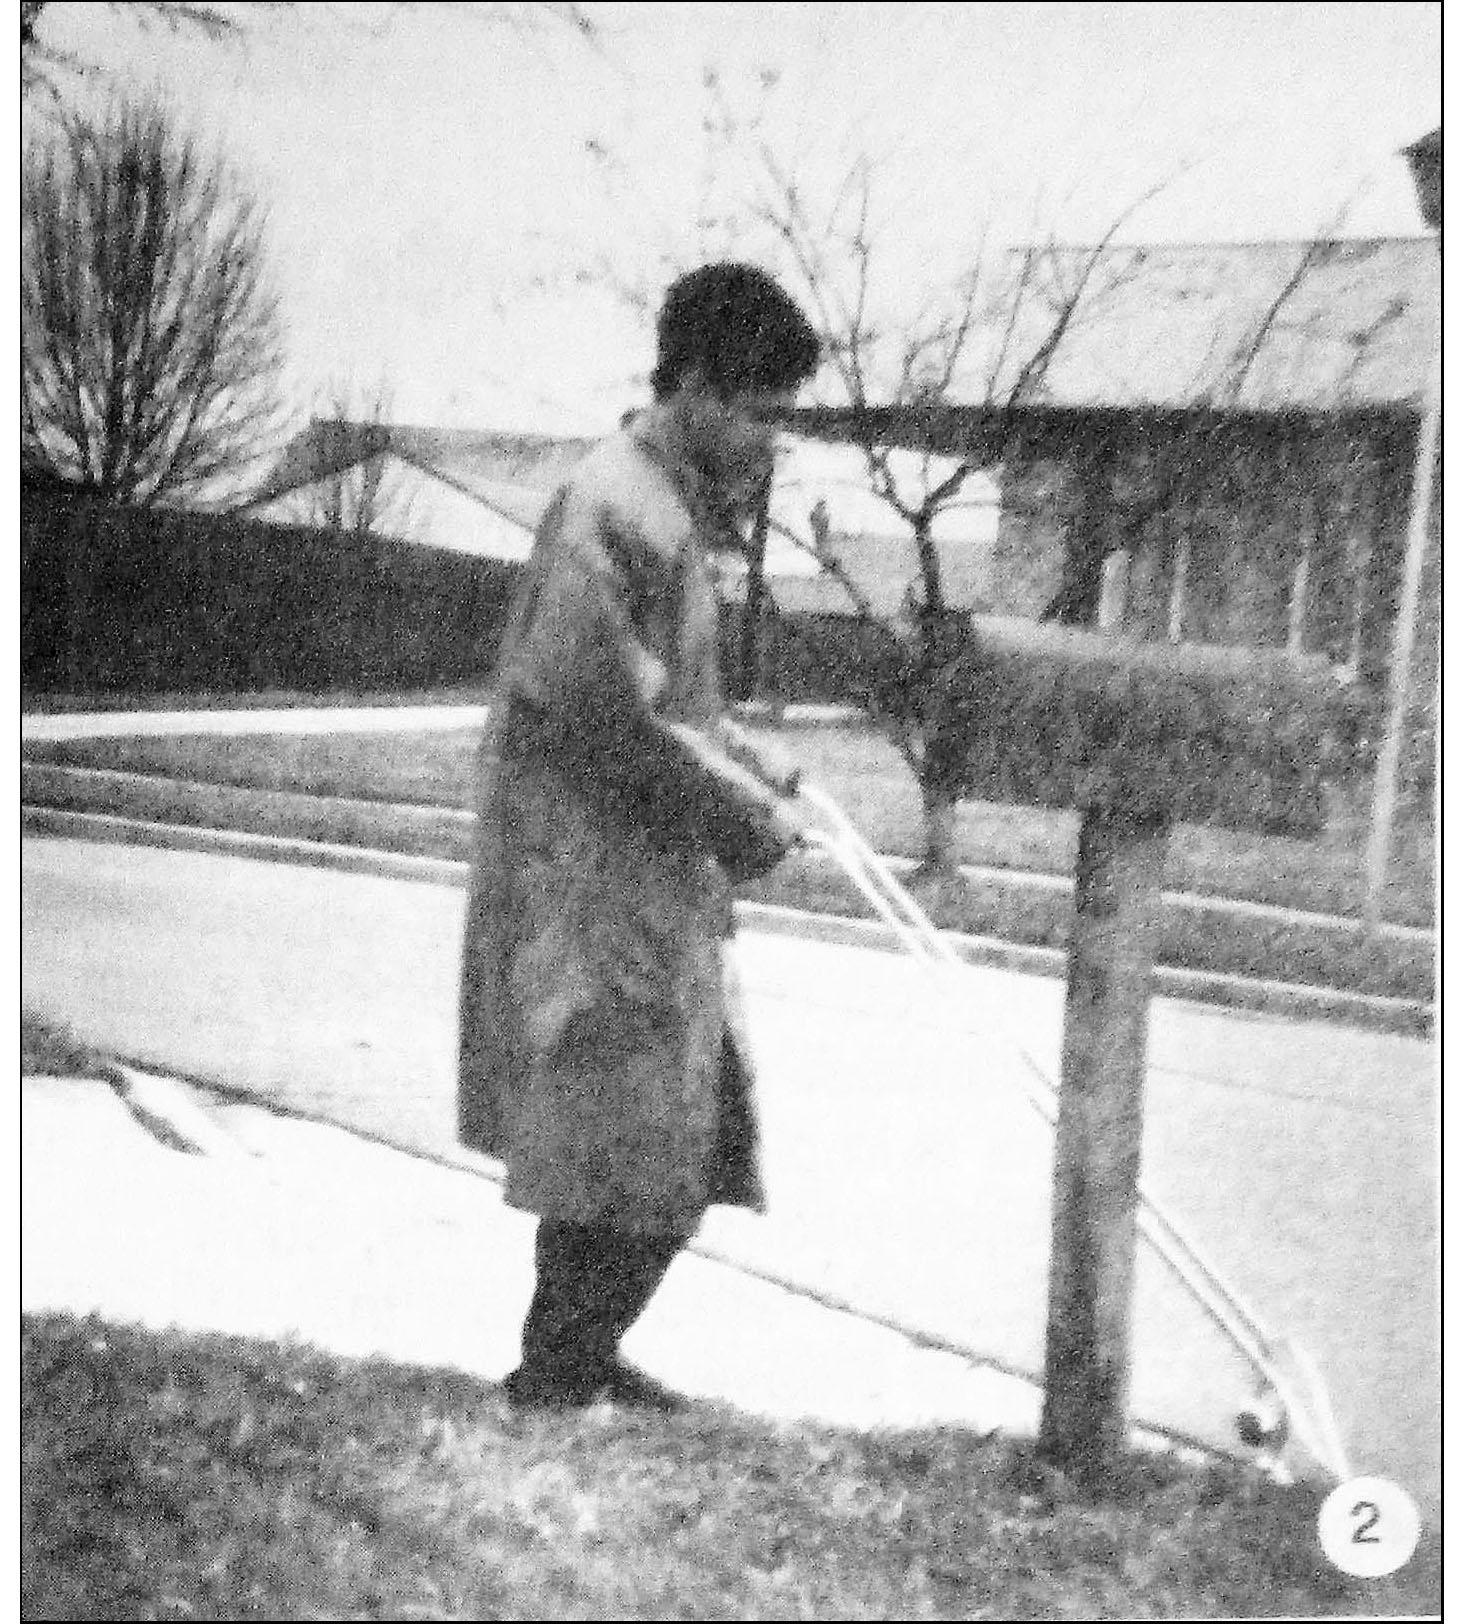 Photo shows the woman standing on the grass and reaching the AMD toward her left, with the wheels in the street.